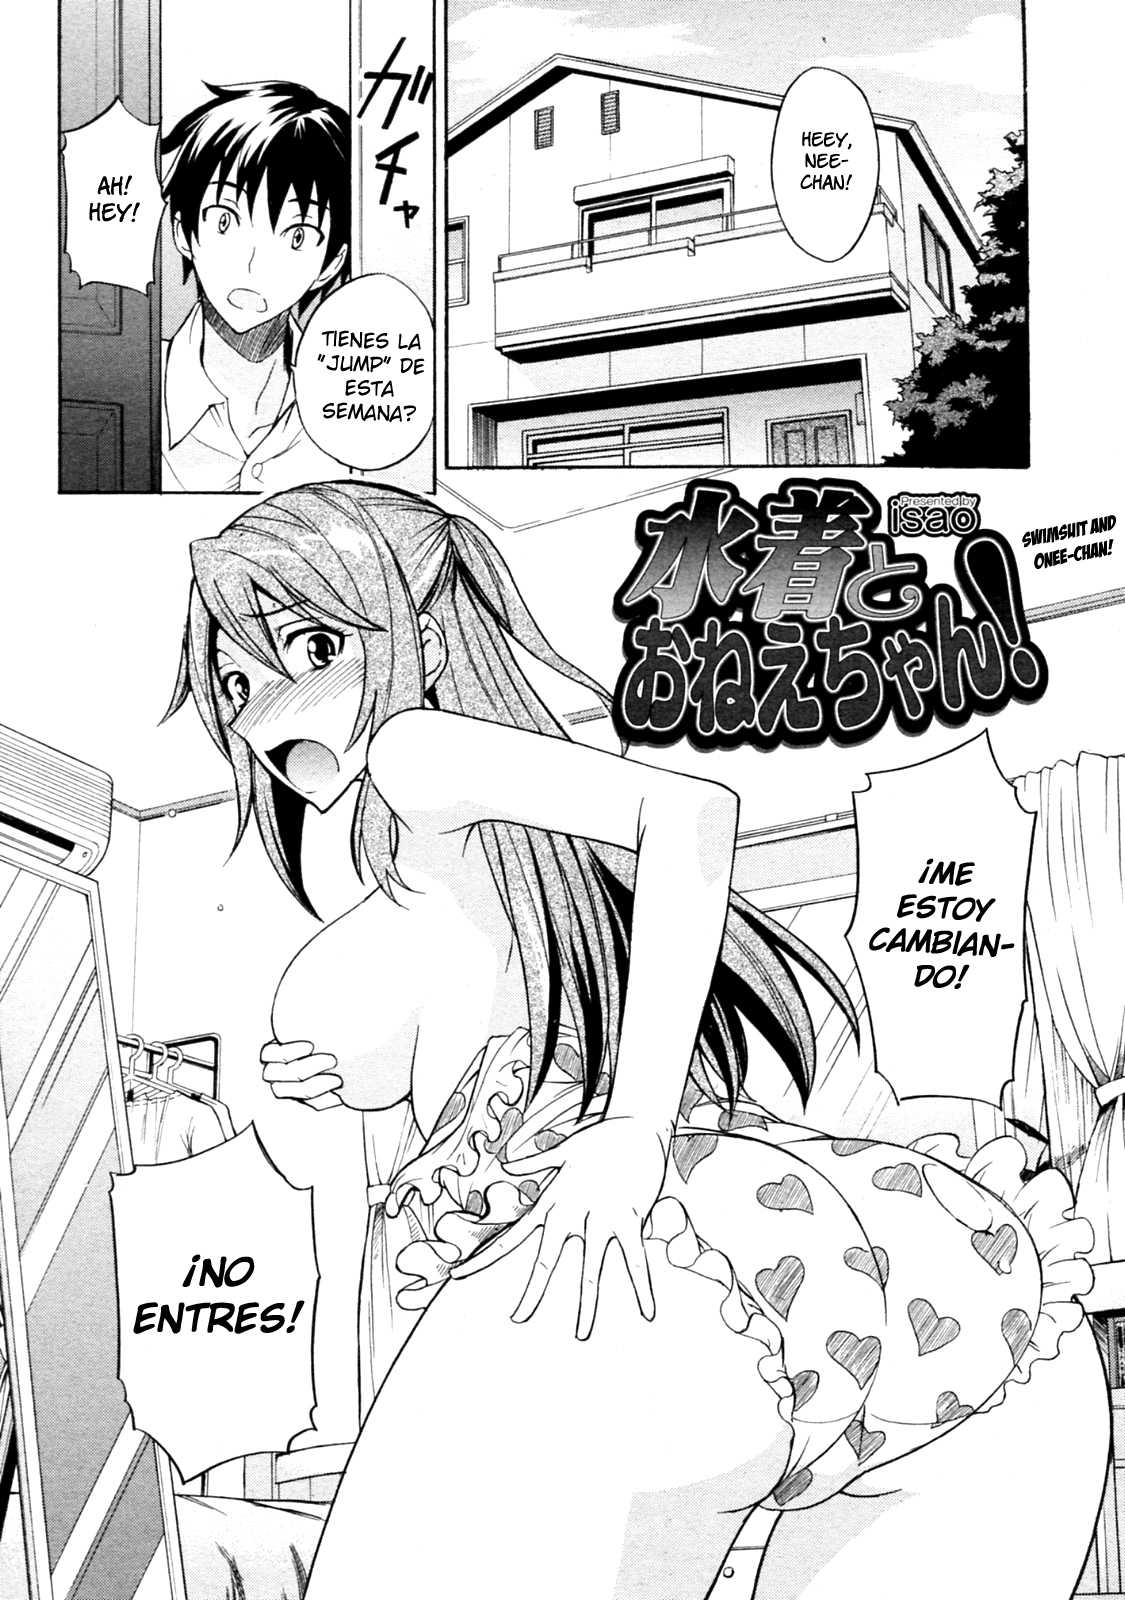 [Isao] Swimsuit and Onee-chan! [Spanish] Traducciones H-22 